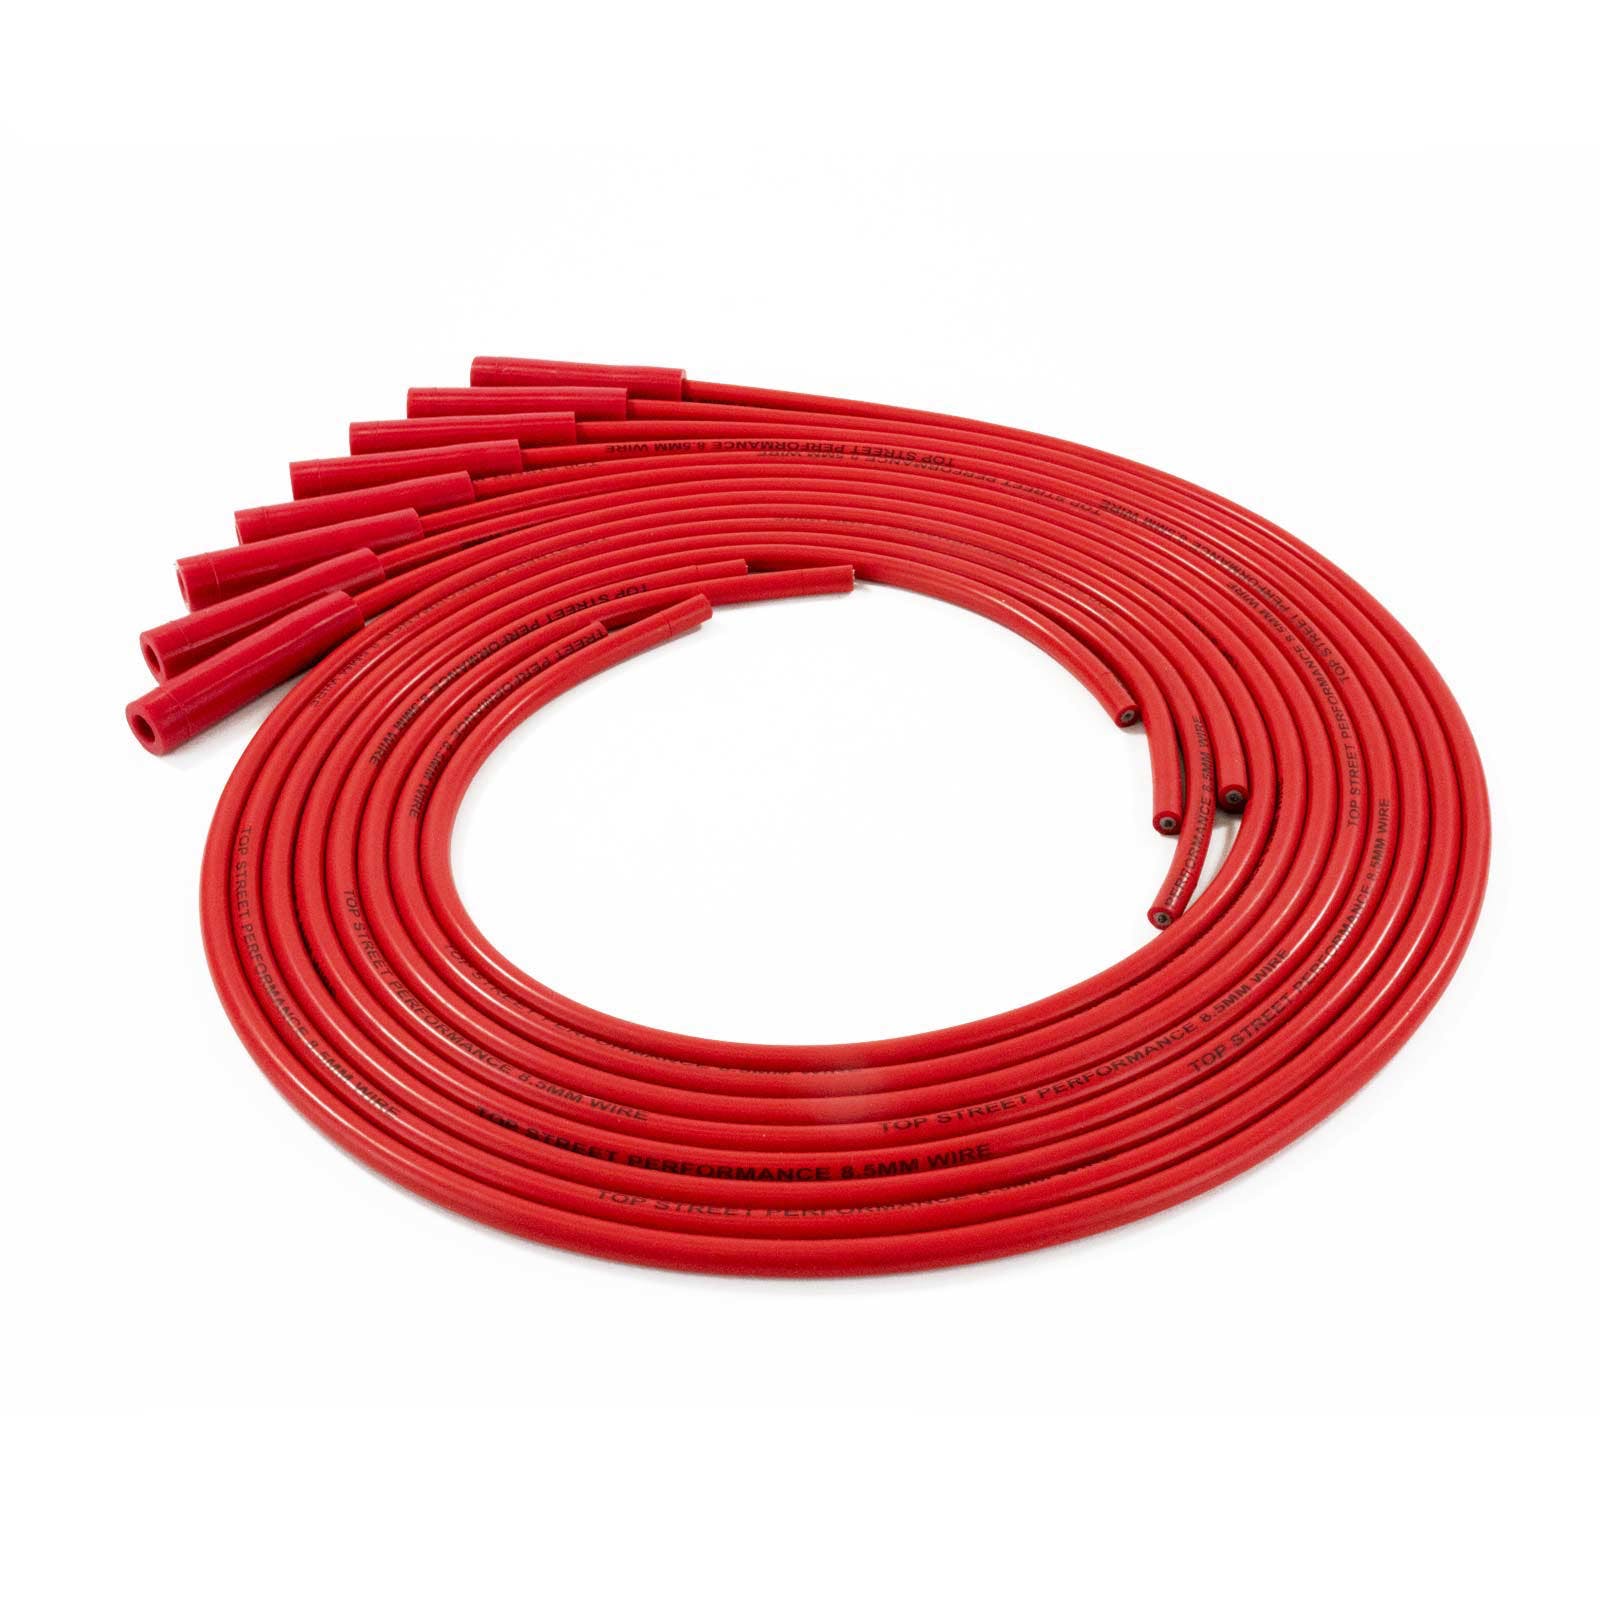 Top Street Performance 85280 Spark Plug Wire Set, Universal Fit 8.5mm with 180 degree Plug Boots, Red